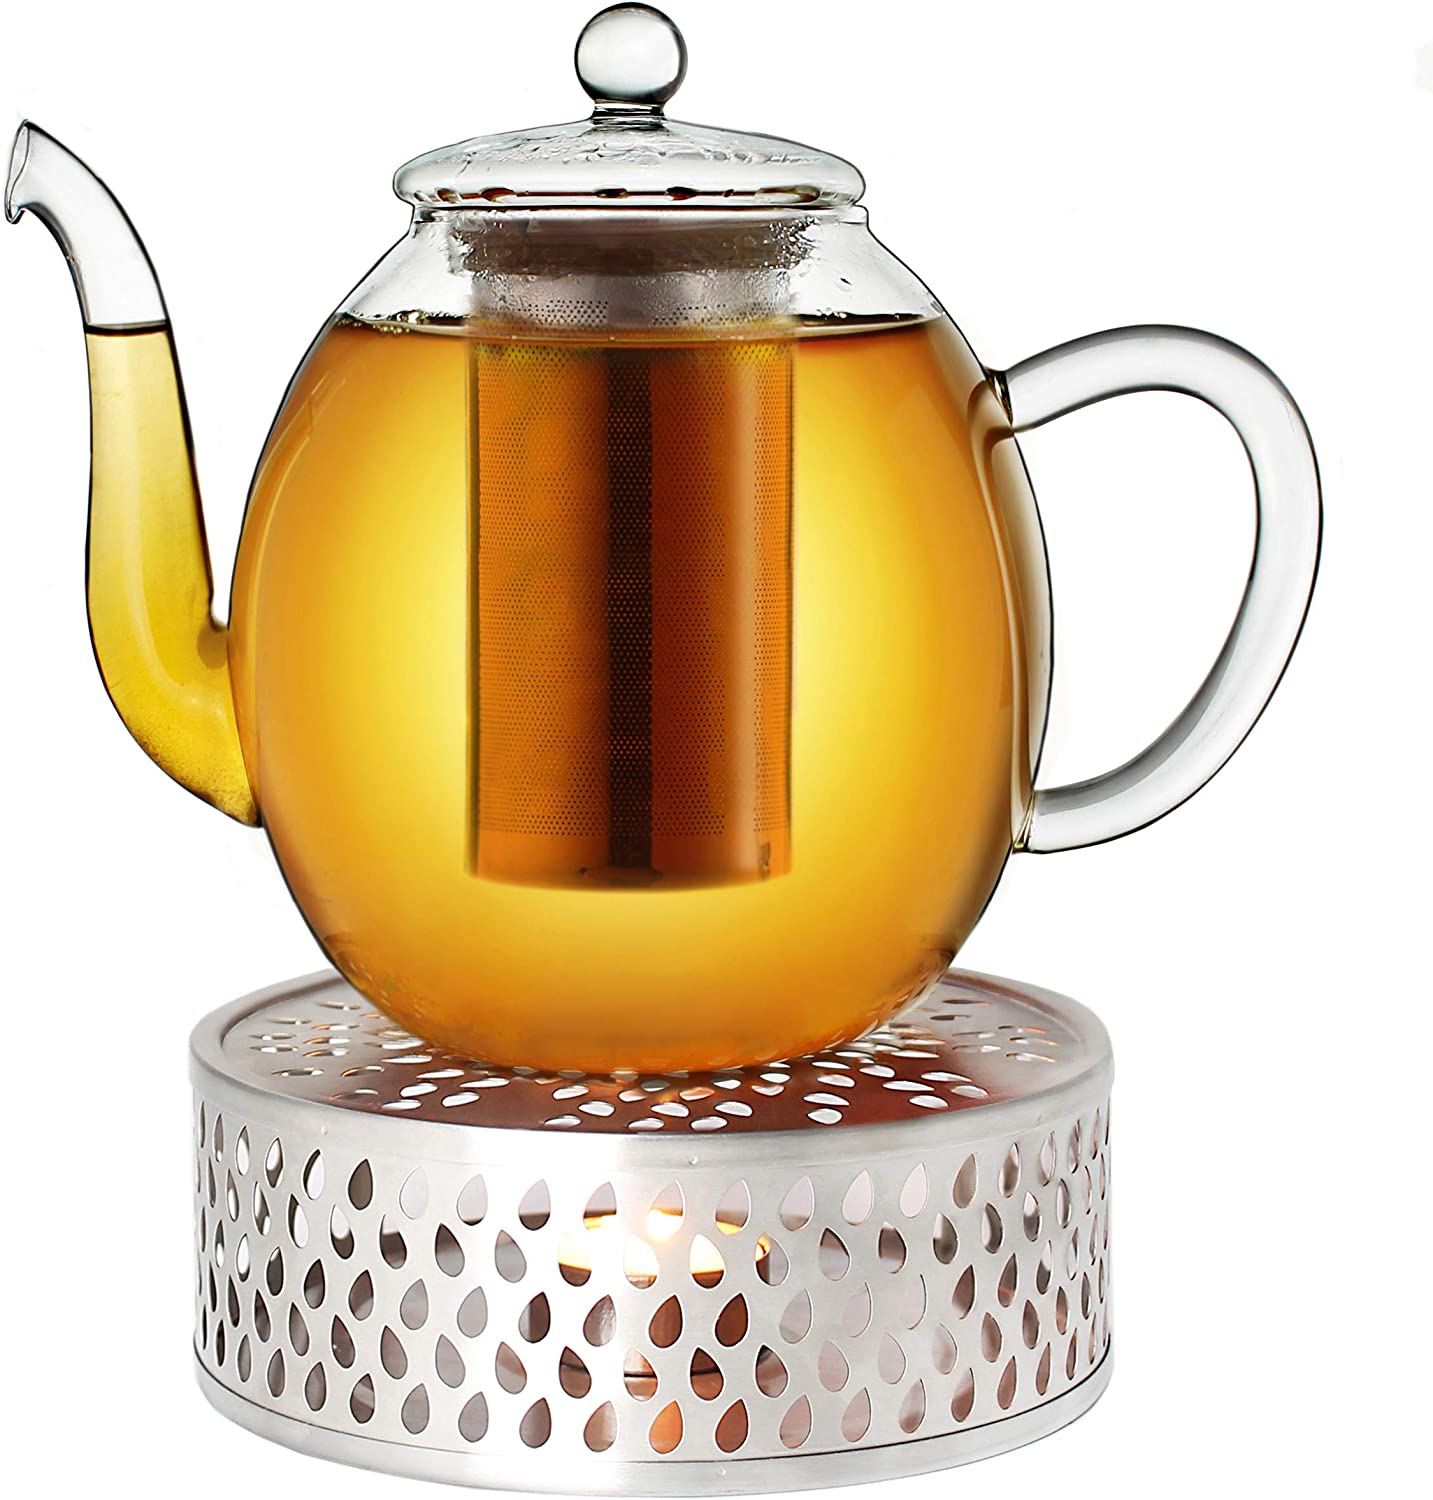 Creano Glass Teapot 1.5 L + a stainless steel warmer, 3-piece glass teapot with integrated stainless steel strainer and glass lid, ideal for preparing loose teas, drip-free